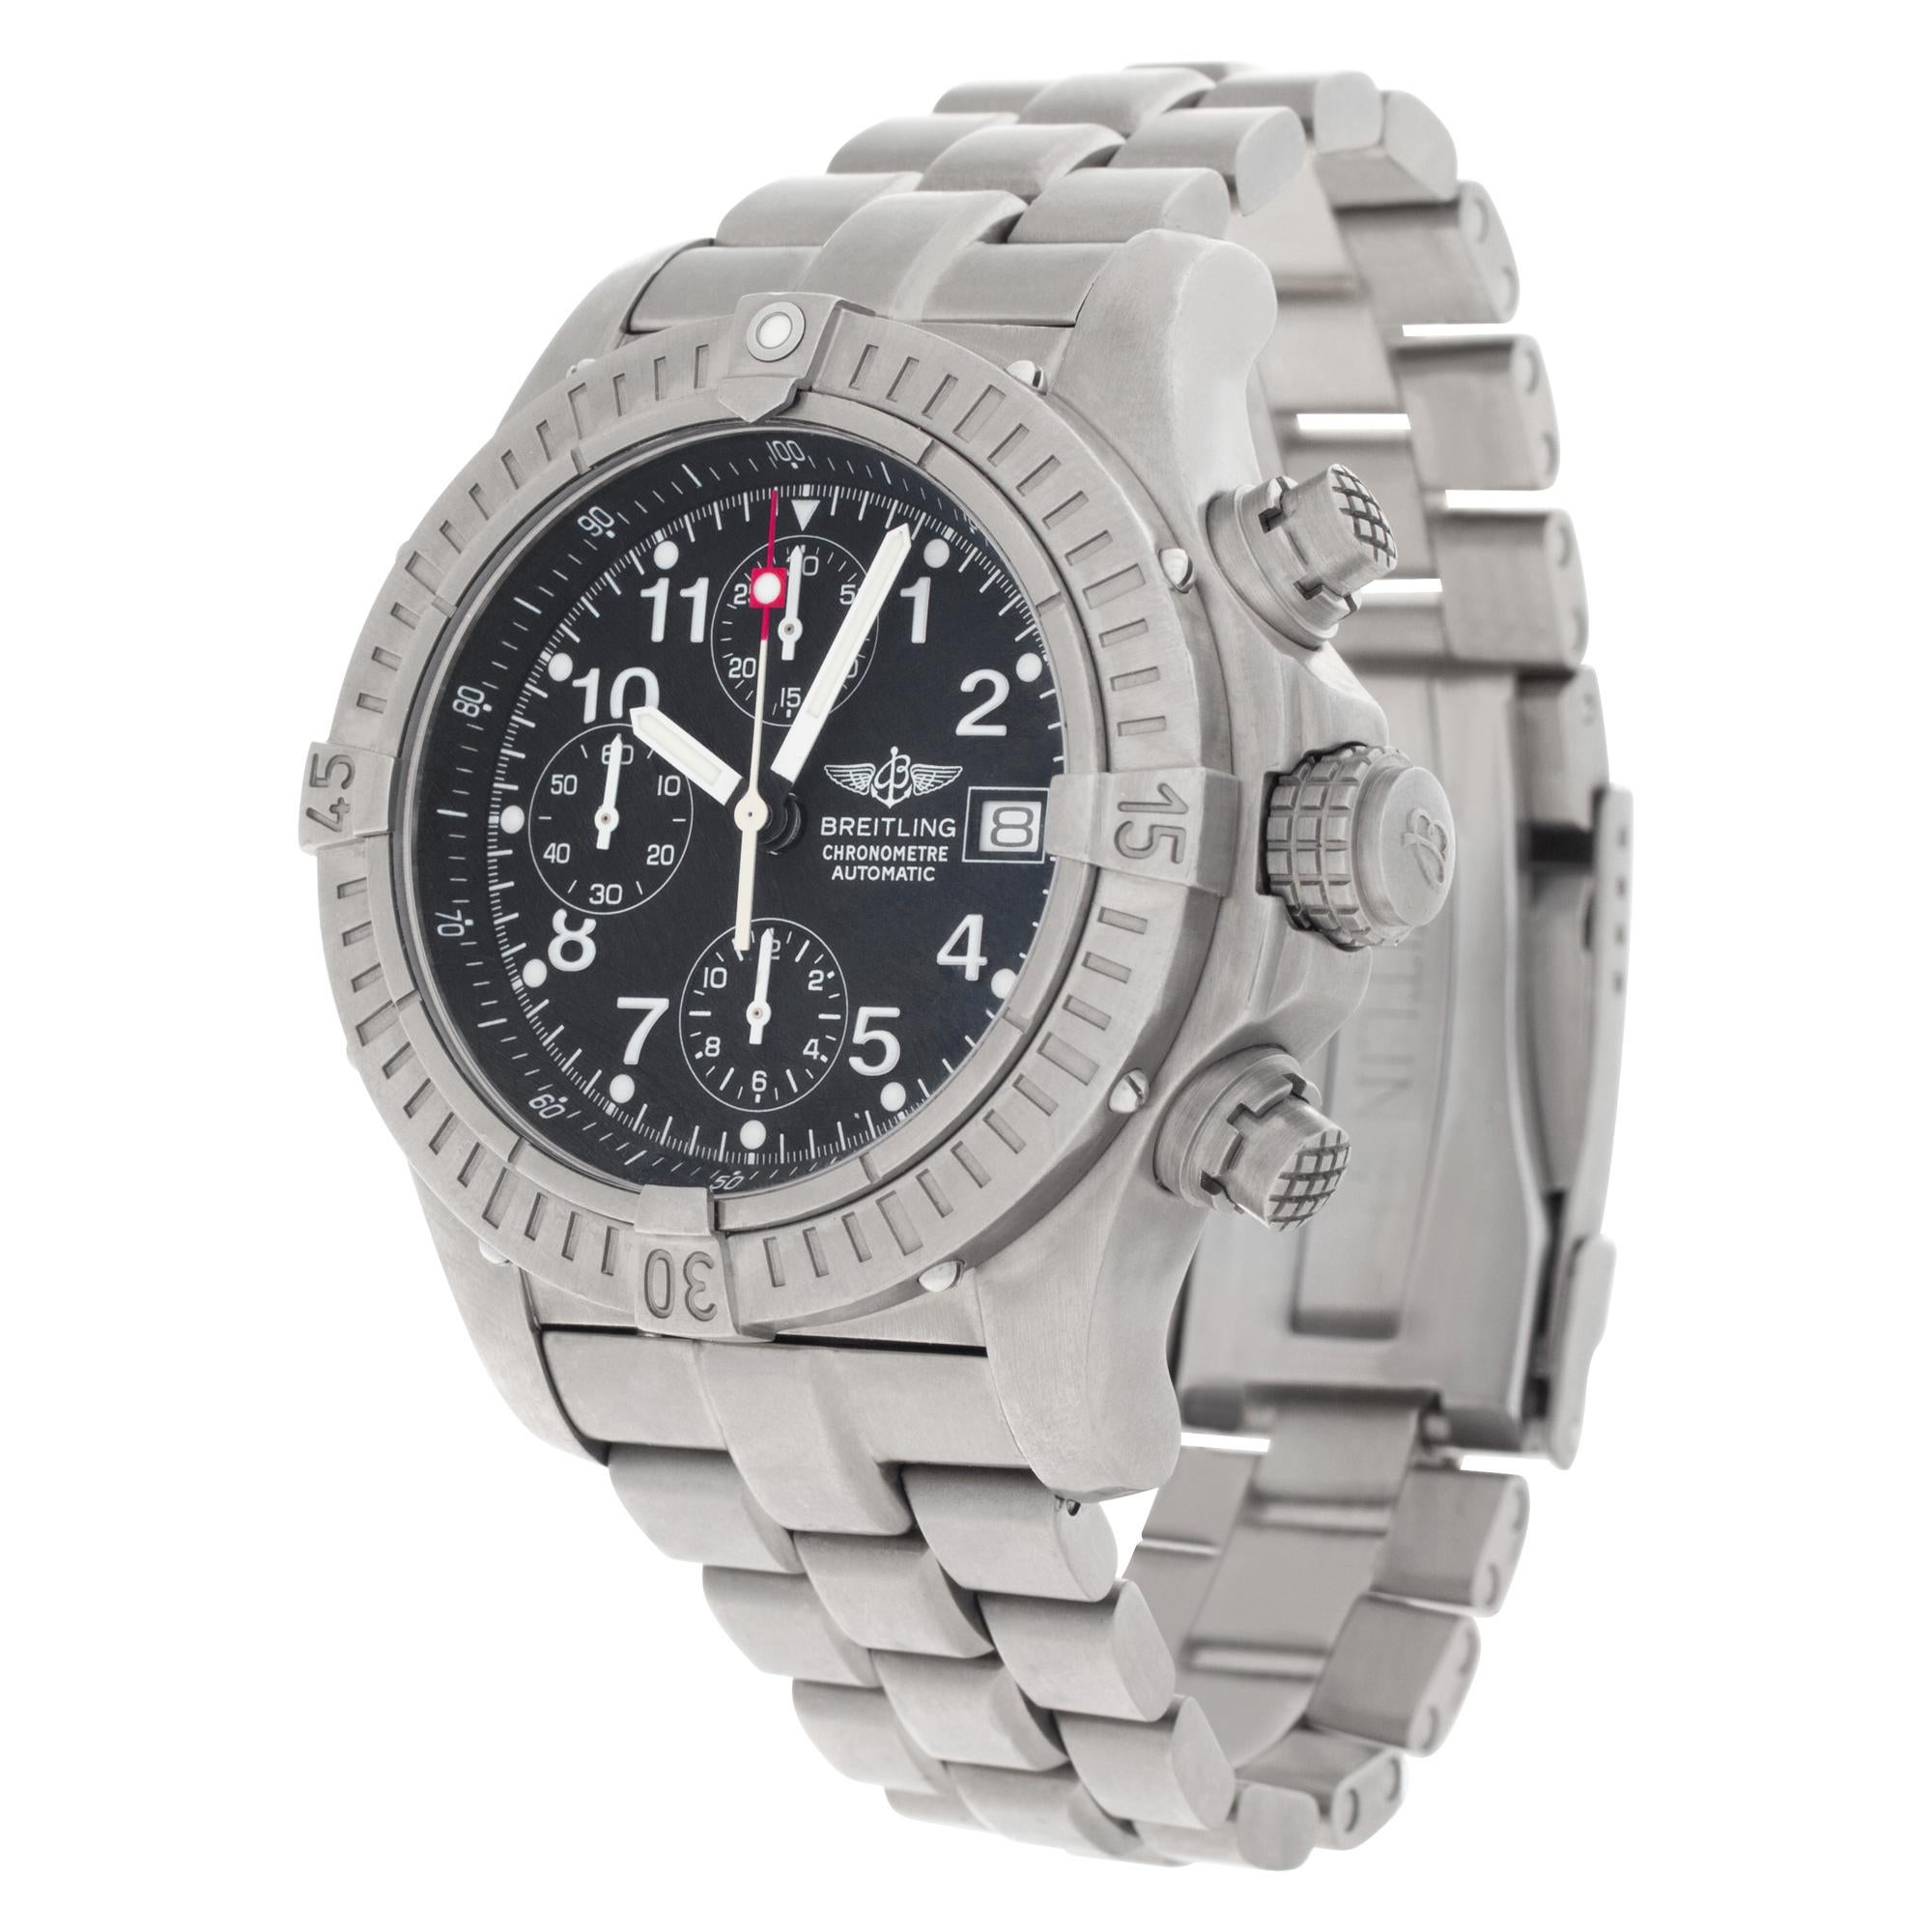 Breitling Chrono Avenger in titanium. Automatic with subseconds, date and chronograph. 44 mm case size. With original chronometer certificate. Ref E13360. Circa 2000s. Fine Pre-owned Breitling Watch.

Certified preowned Sport Breitling Avenger